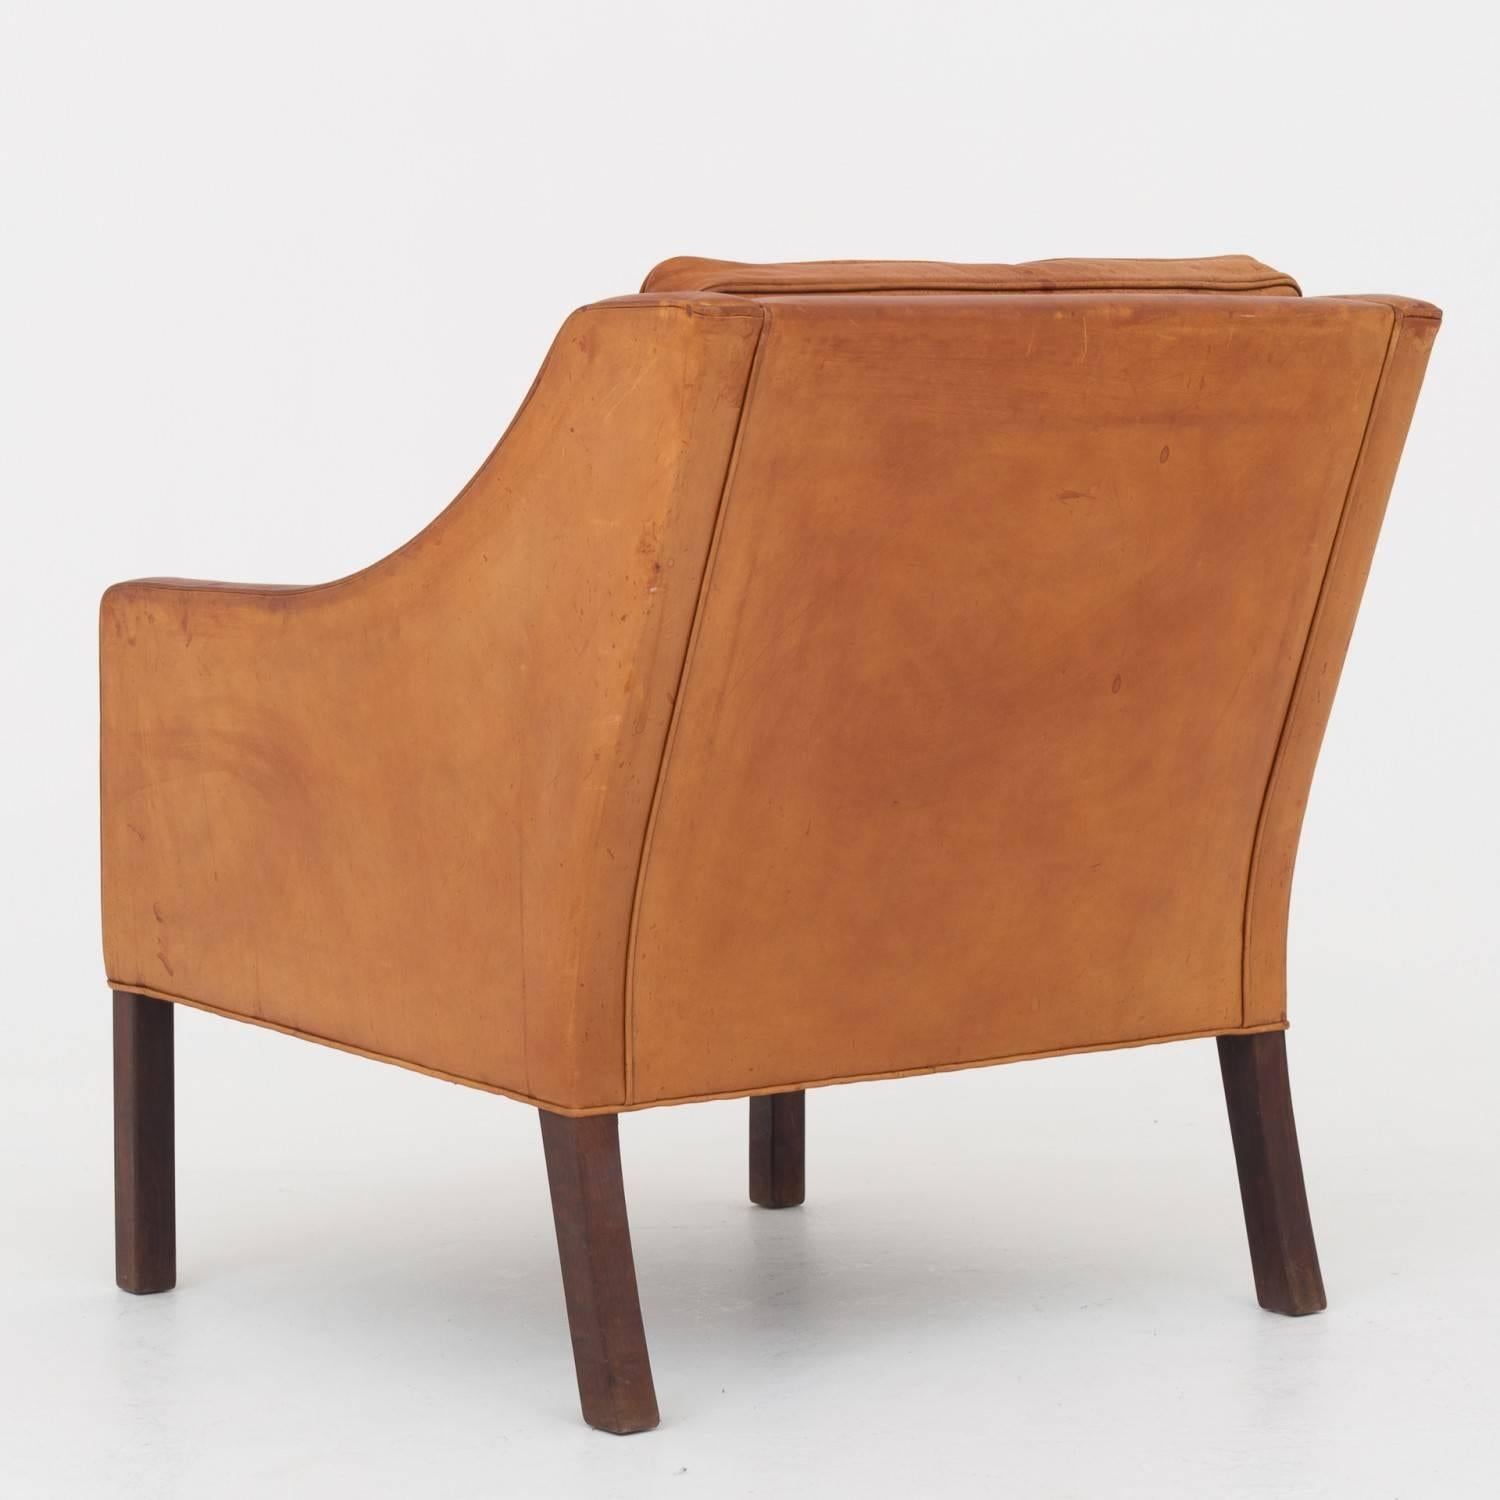 Easy chair in patinated natural leather. Legs in walnut. Matching two-seat is available. Made at Fredericia Furniture.